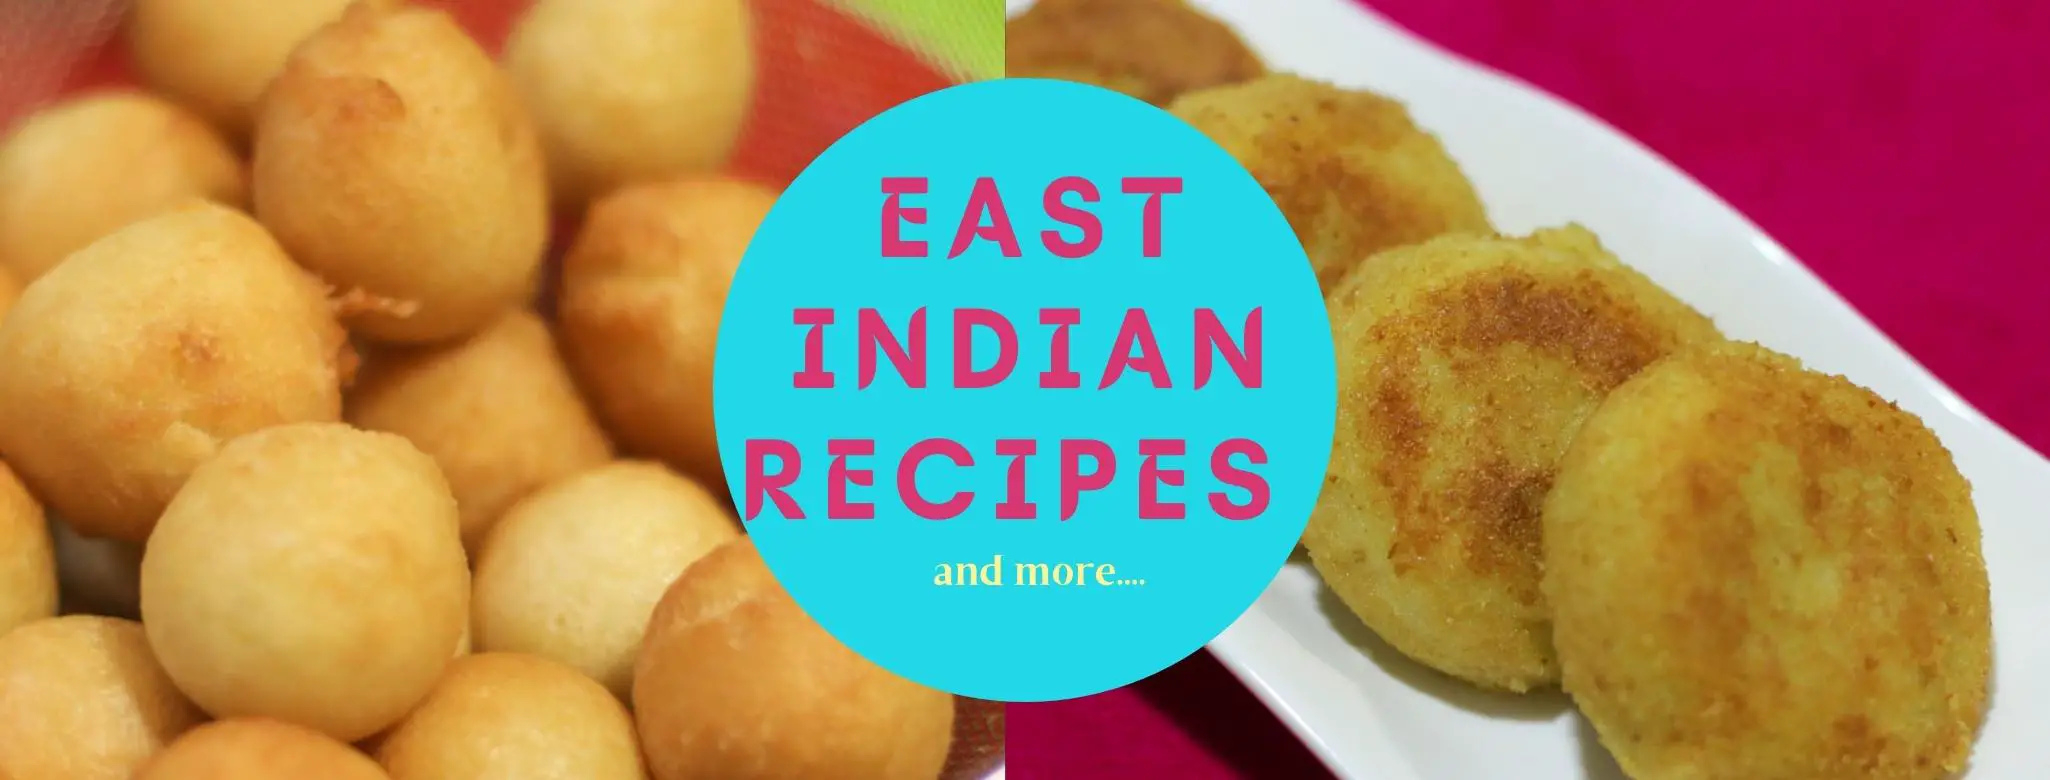 East Indian Recipes